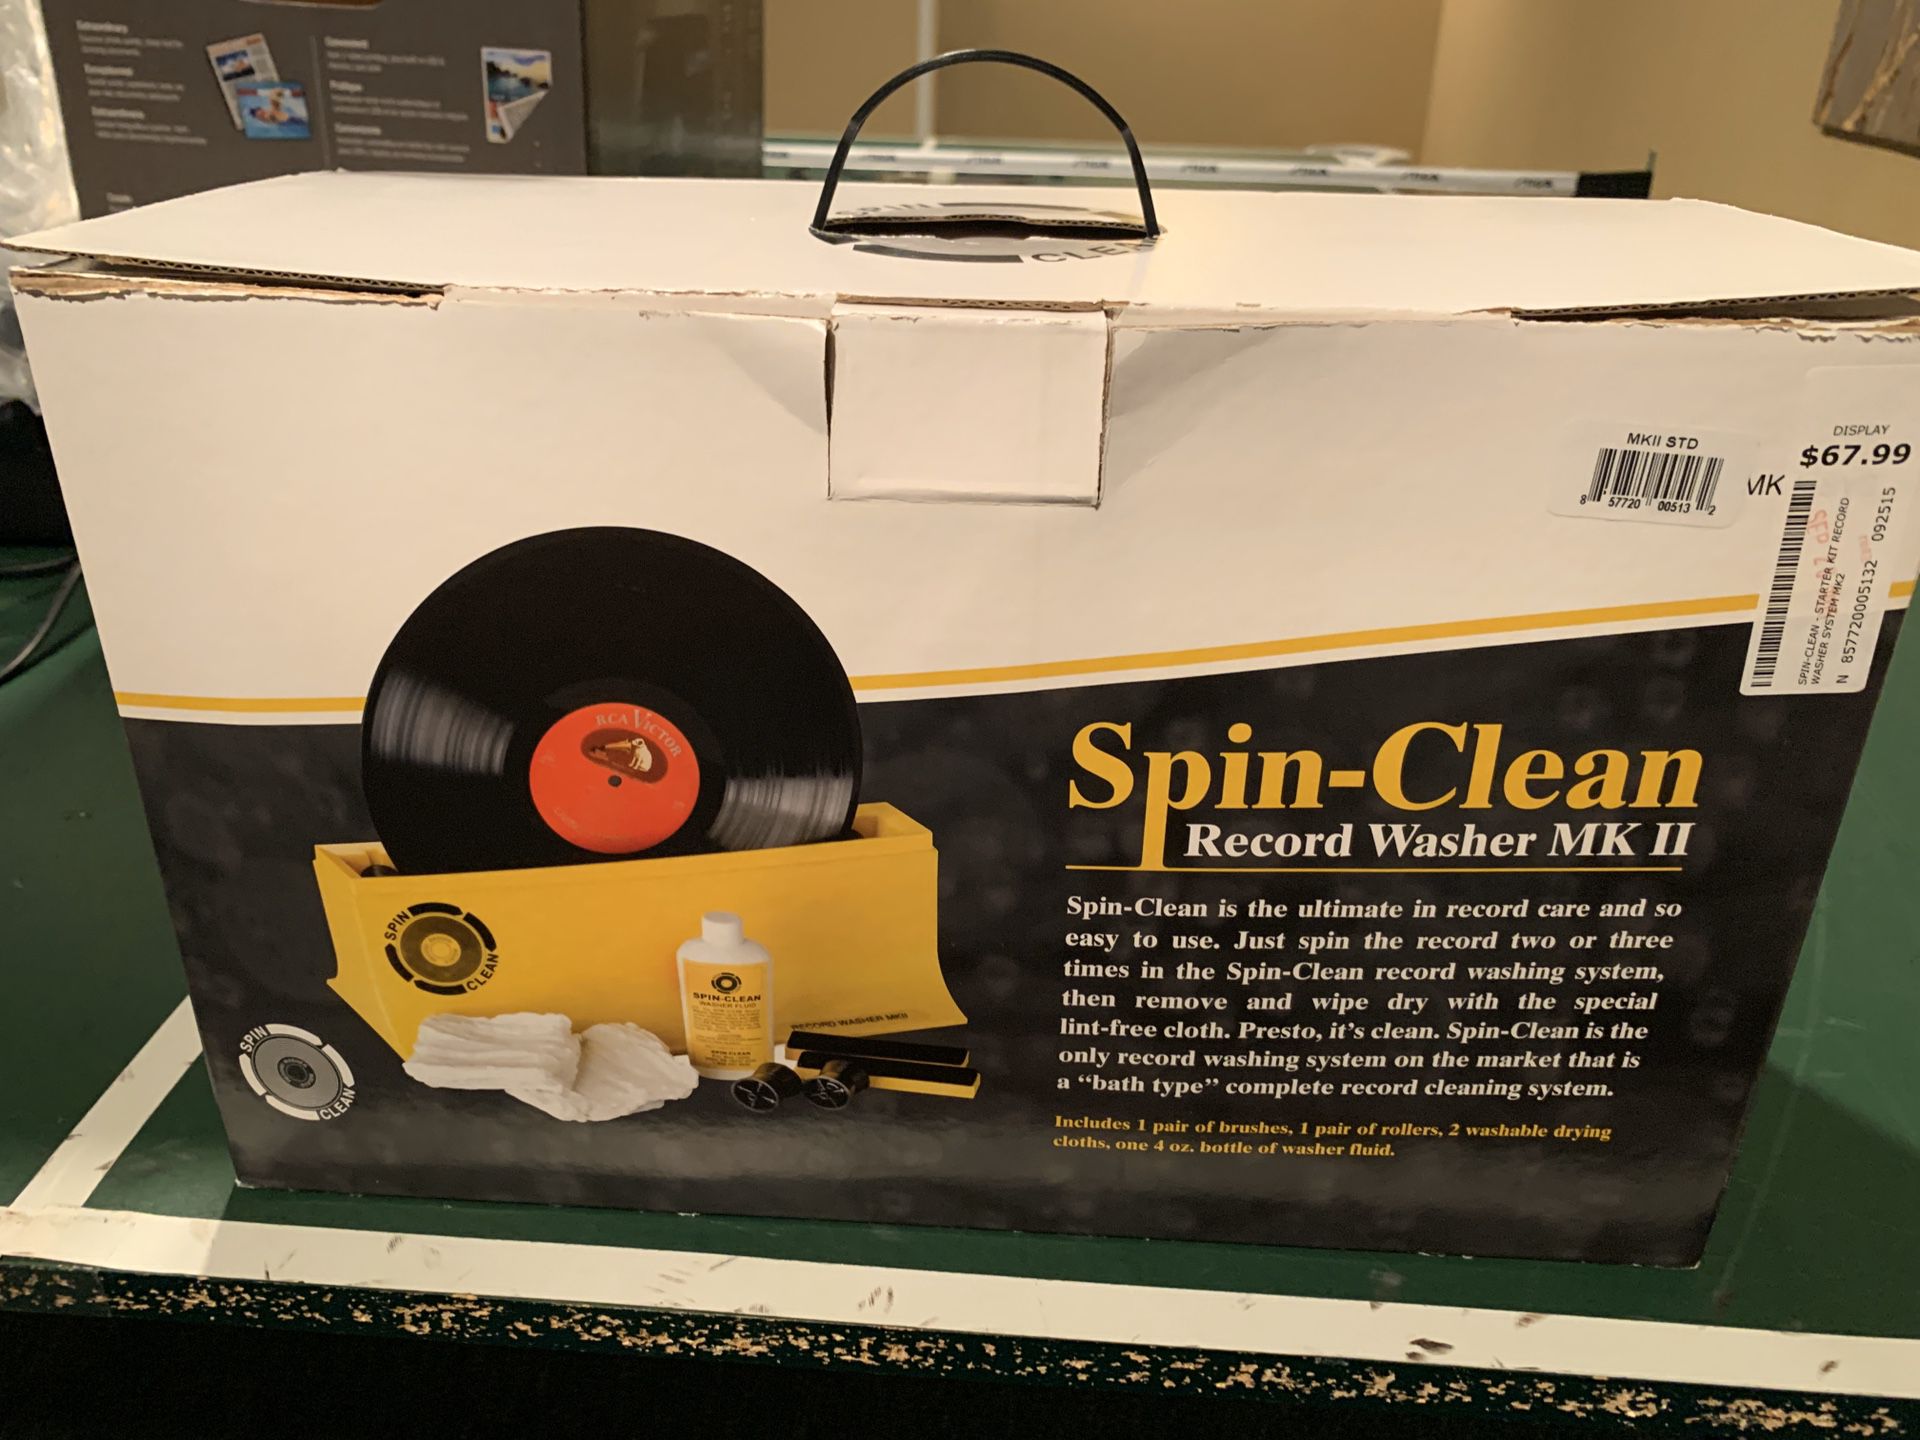 Record LP Album Spin-Cleaner Washer MK II with all accessories.